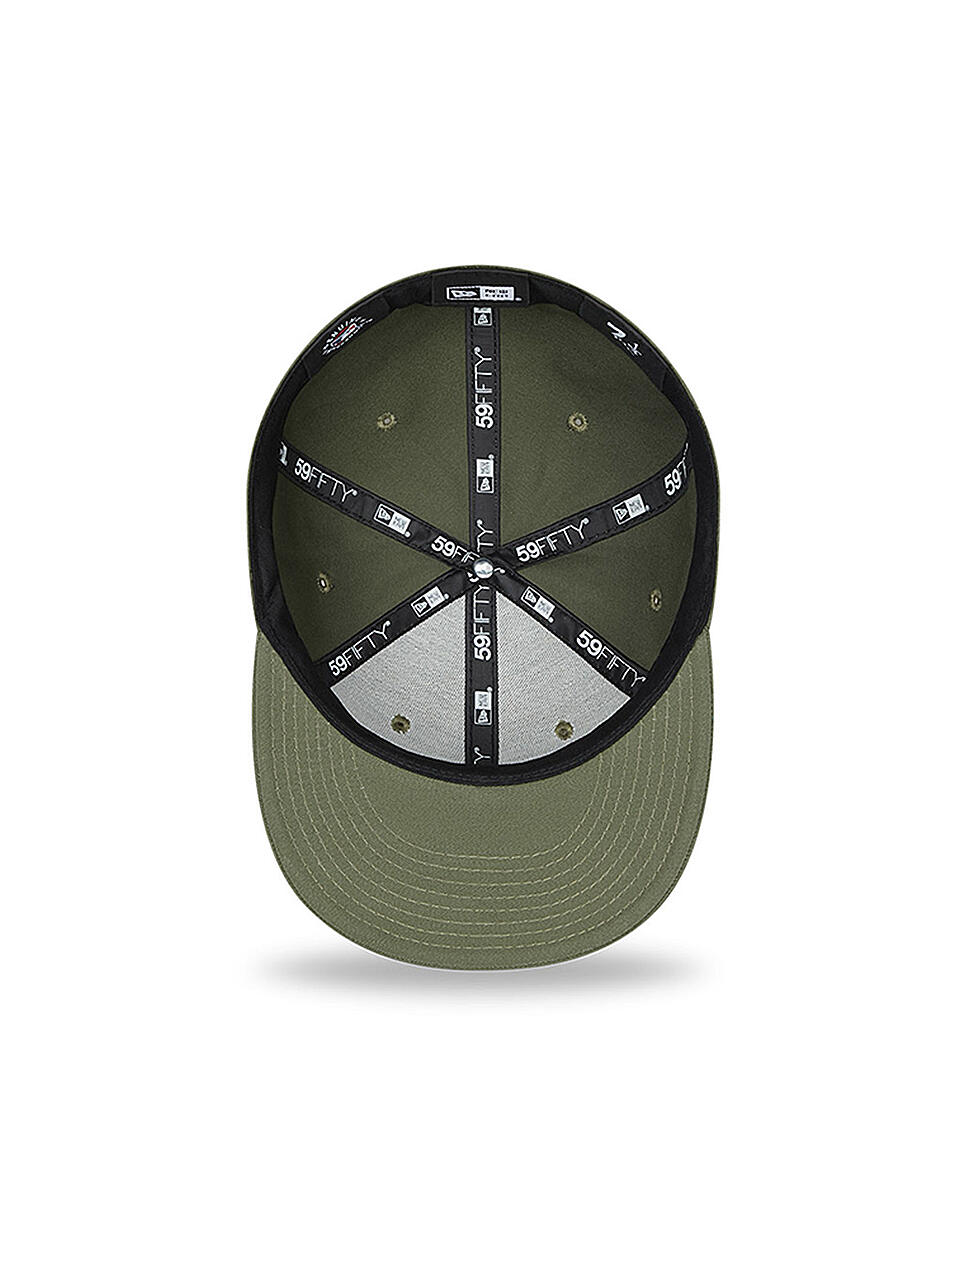 NEW ERA | Kappe League Essential 59Fifty | olive